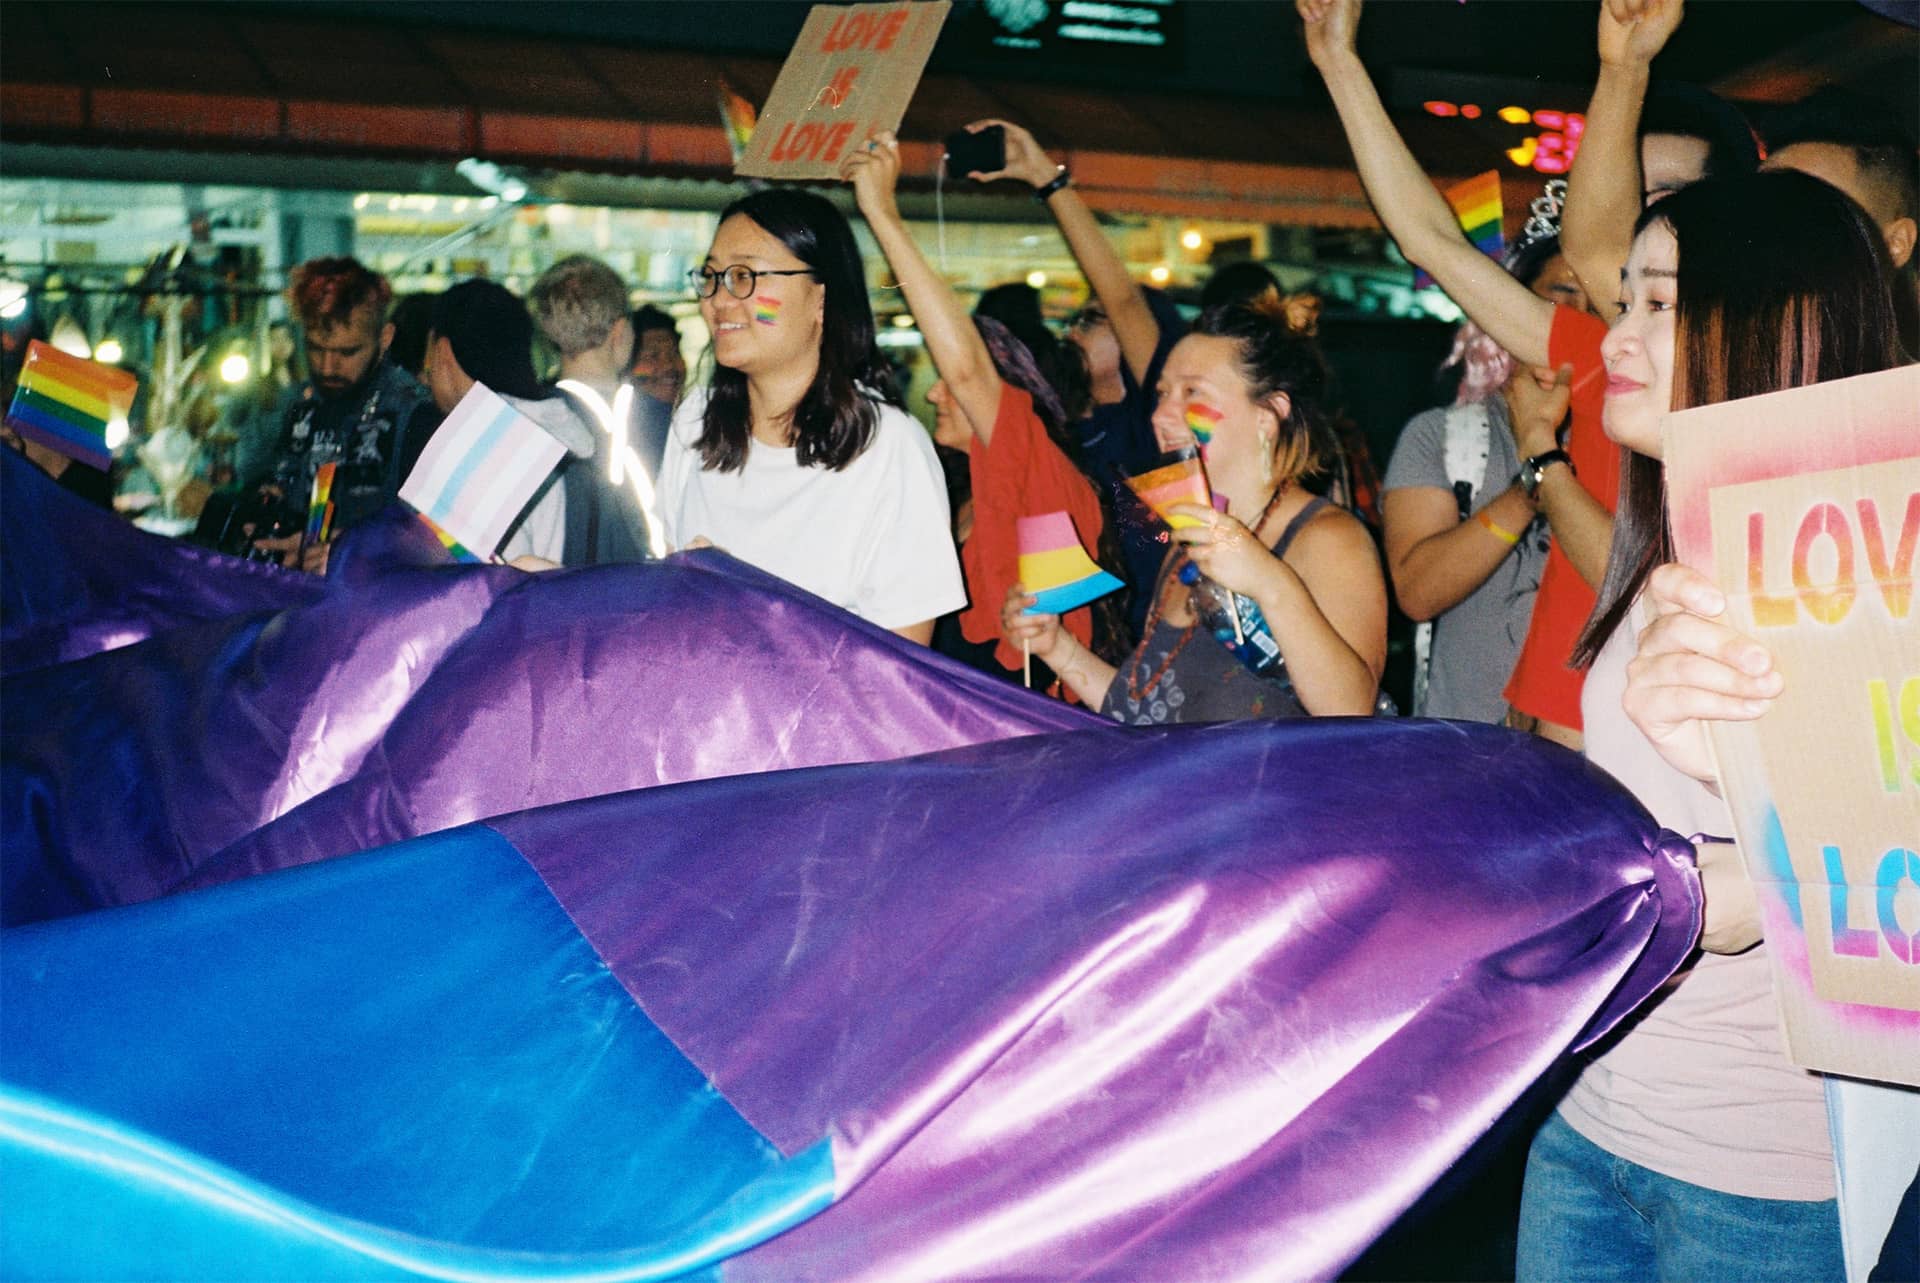 Lovewins Poster, people in a pride parade holding posters and a rainbow flag